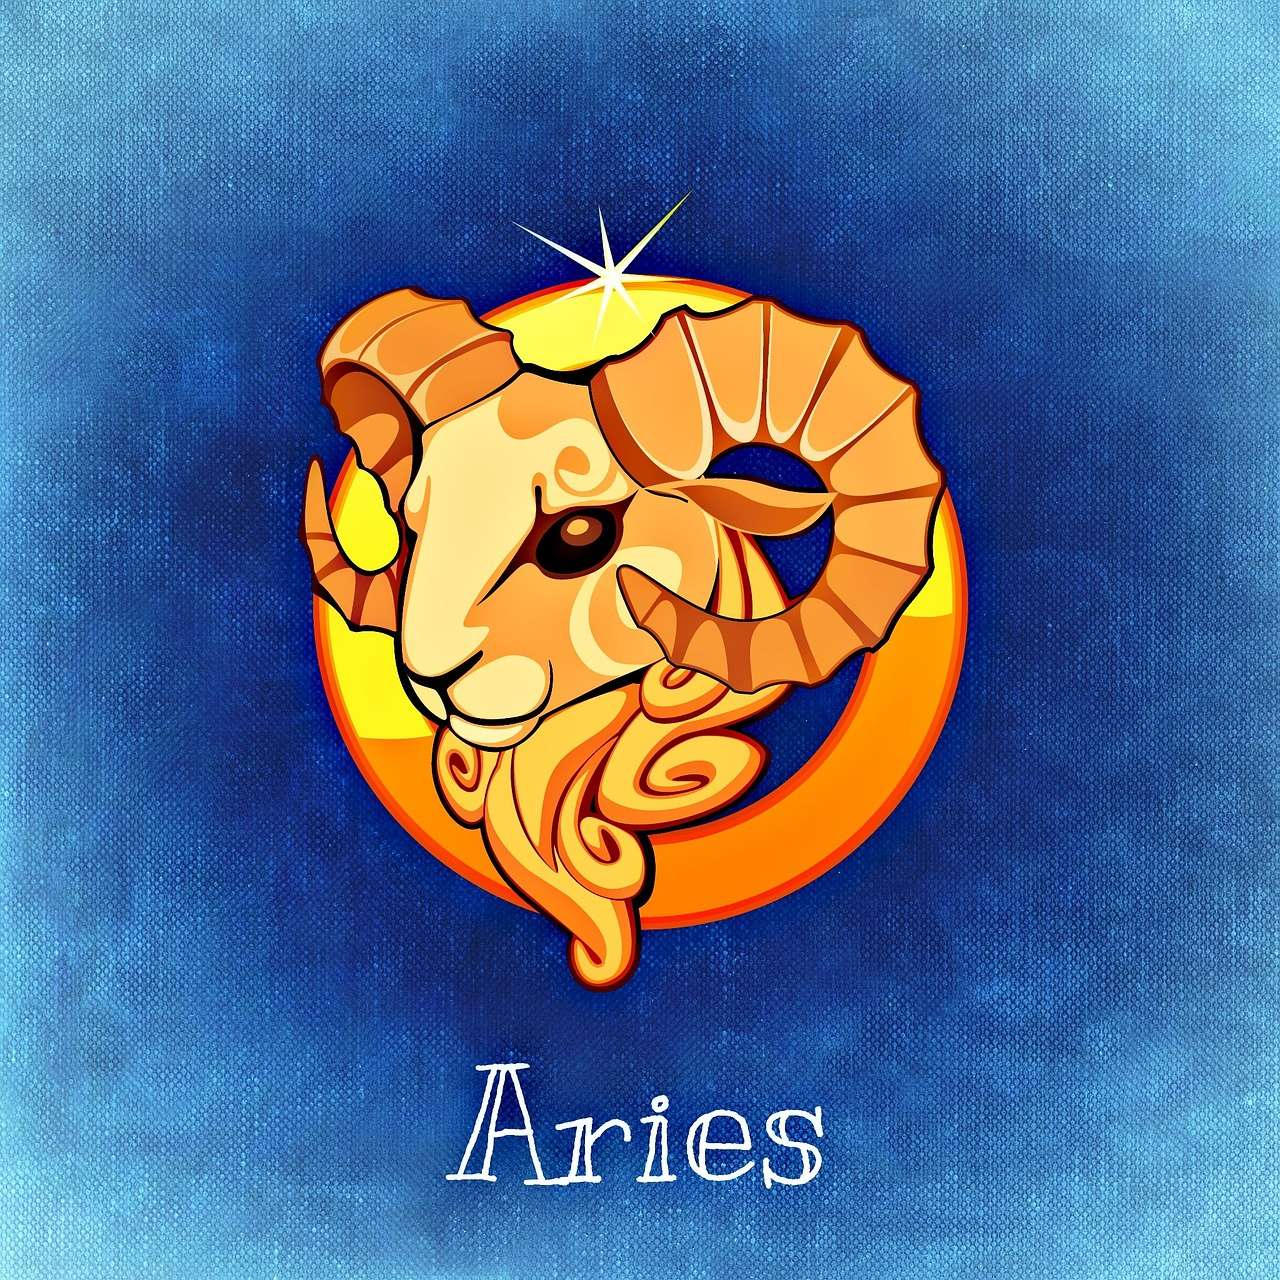 What is Aries polarity sign?